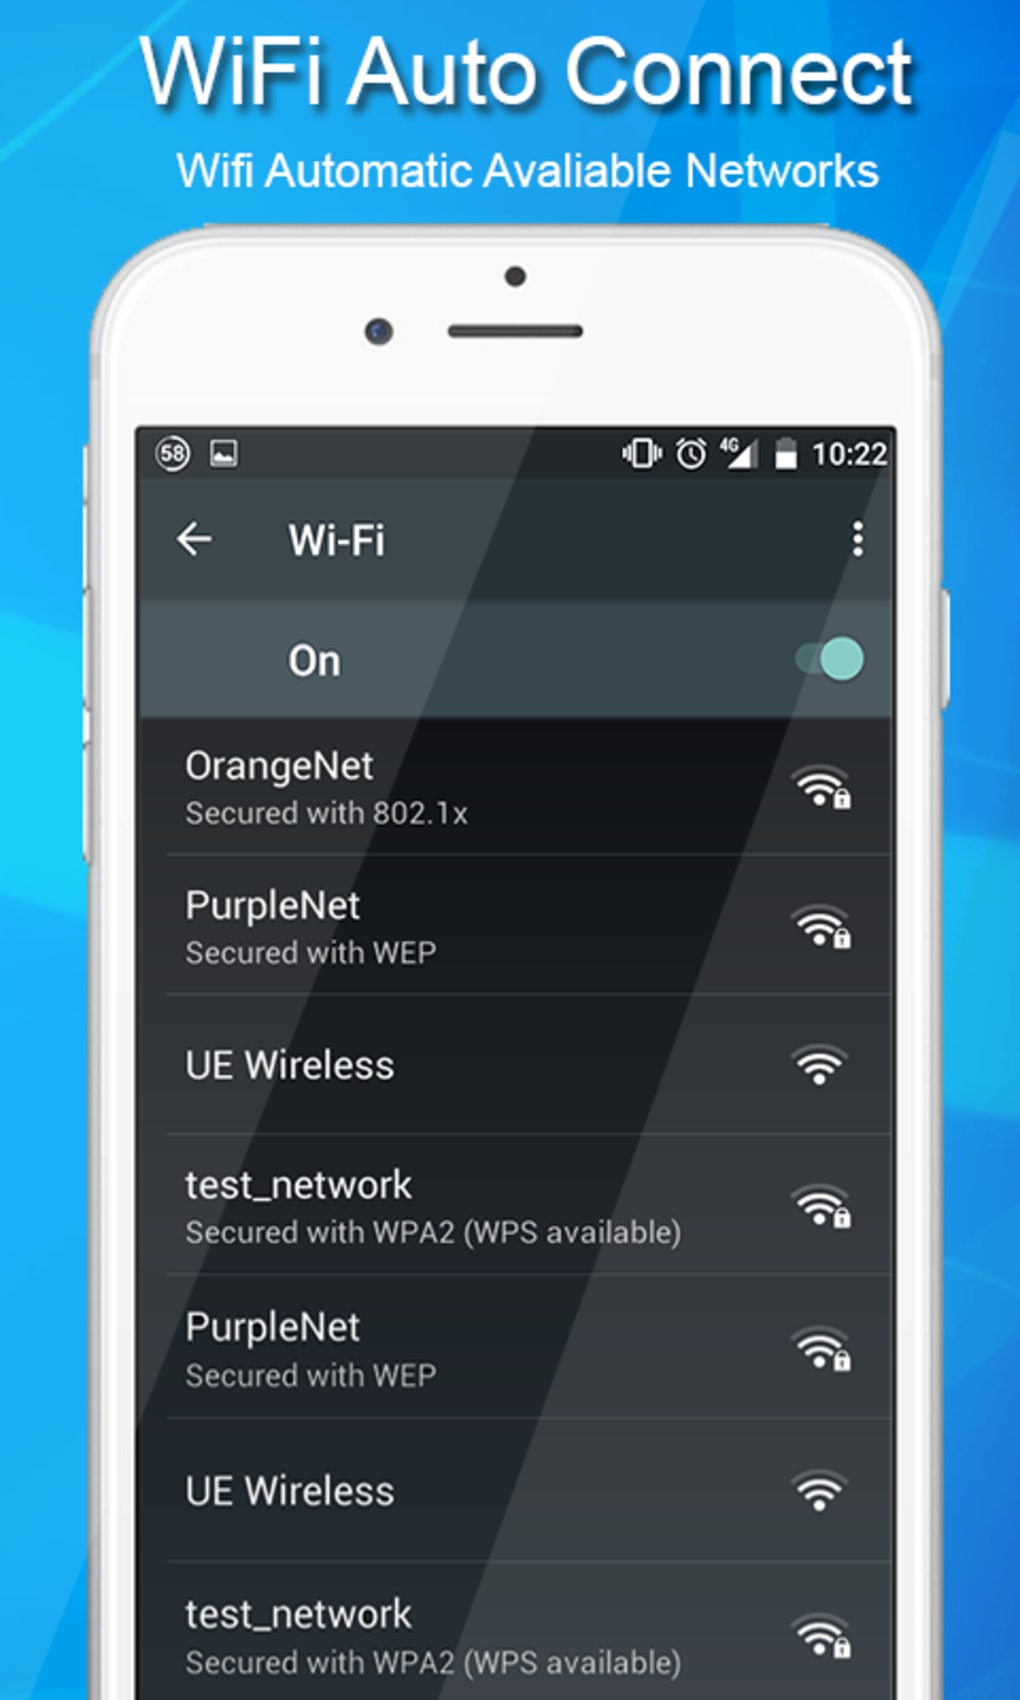 vonk milieu blootstelling WiFi Automatic WiFi Auto Unlock and Connect for Android - Download